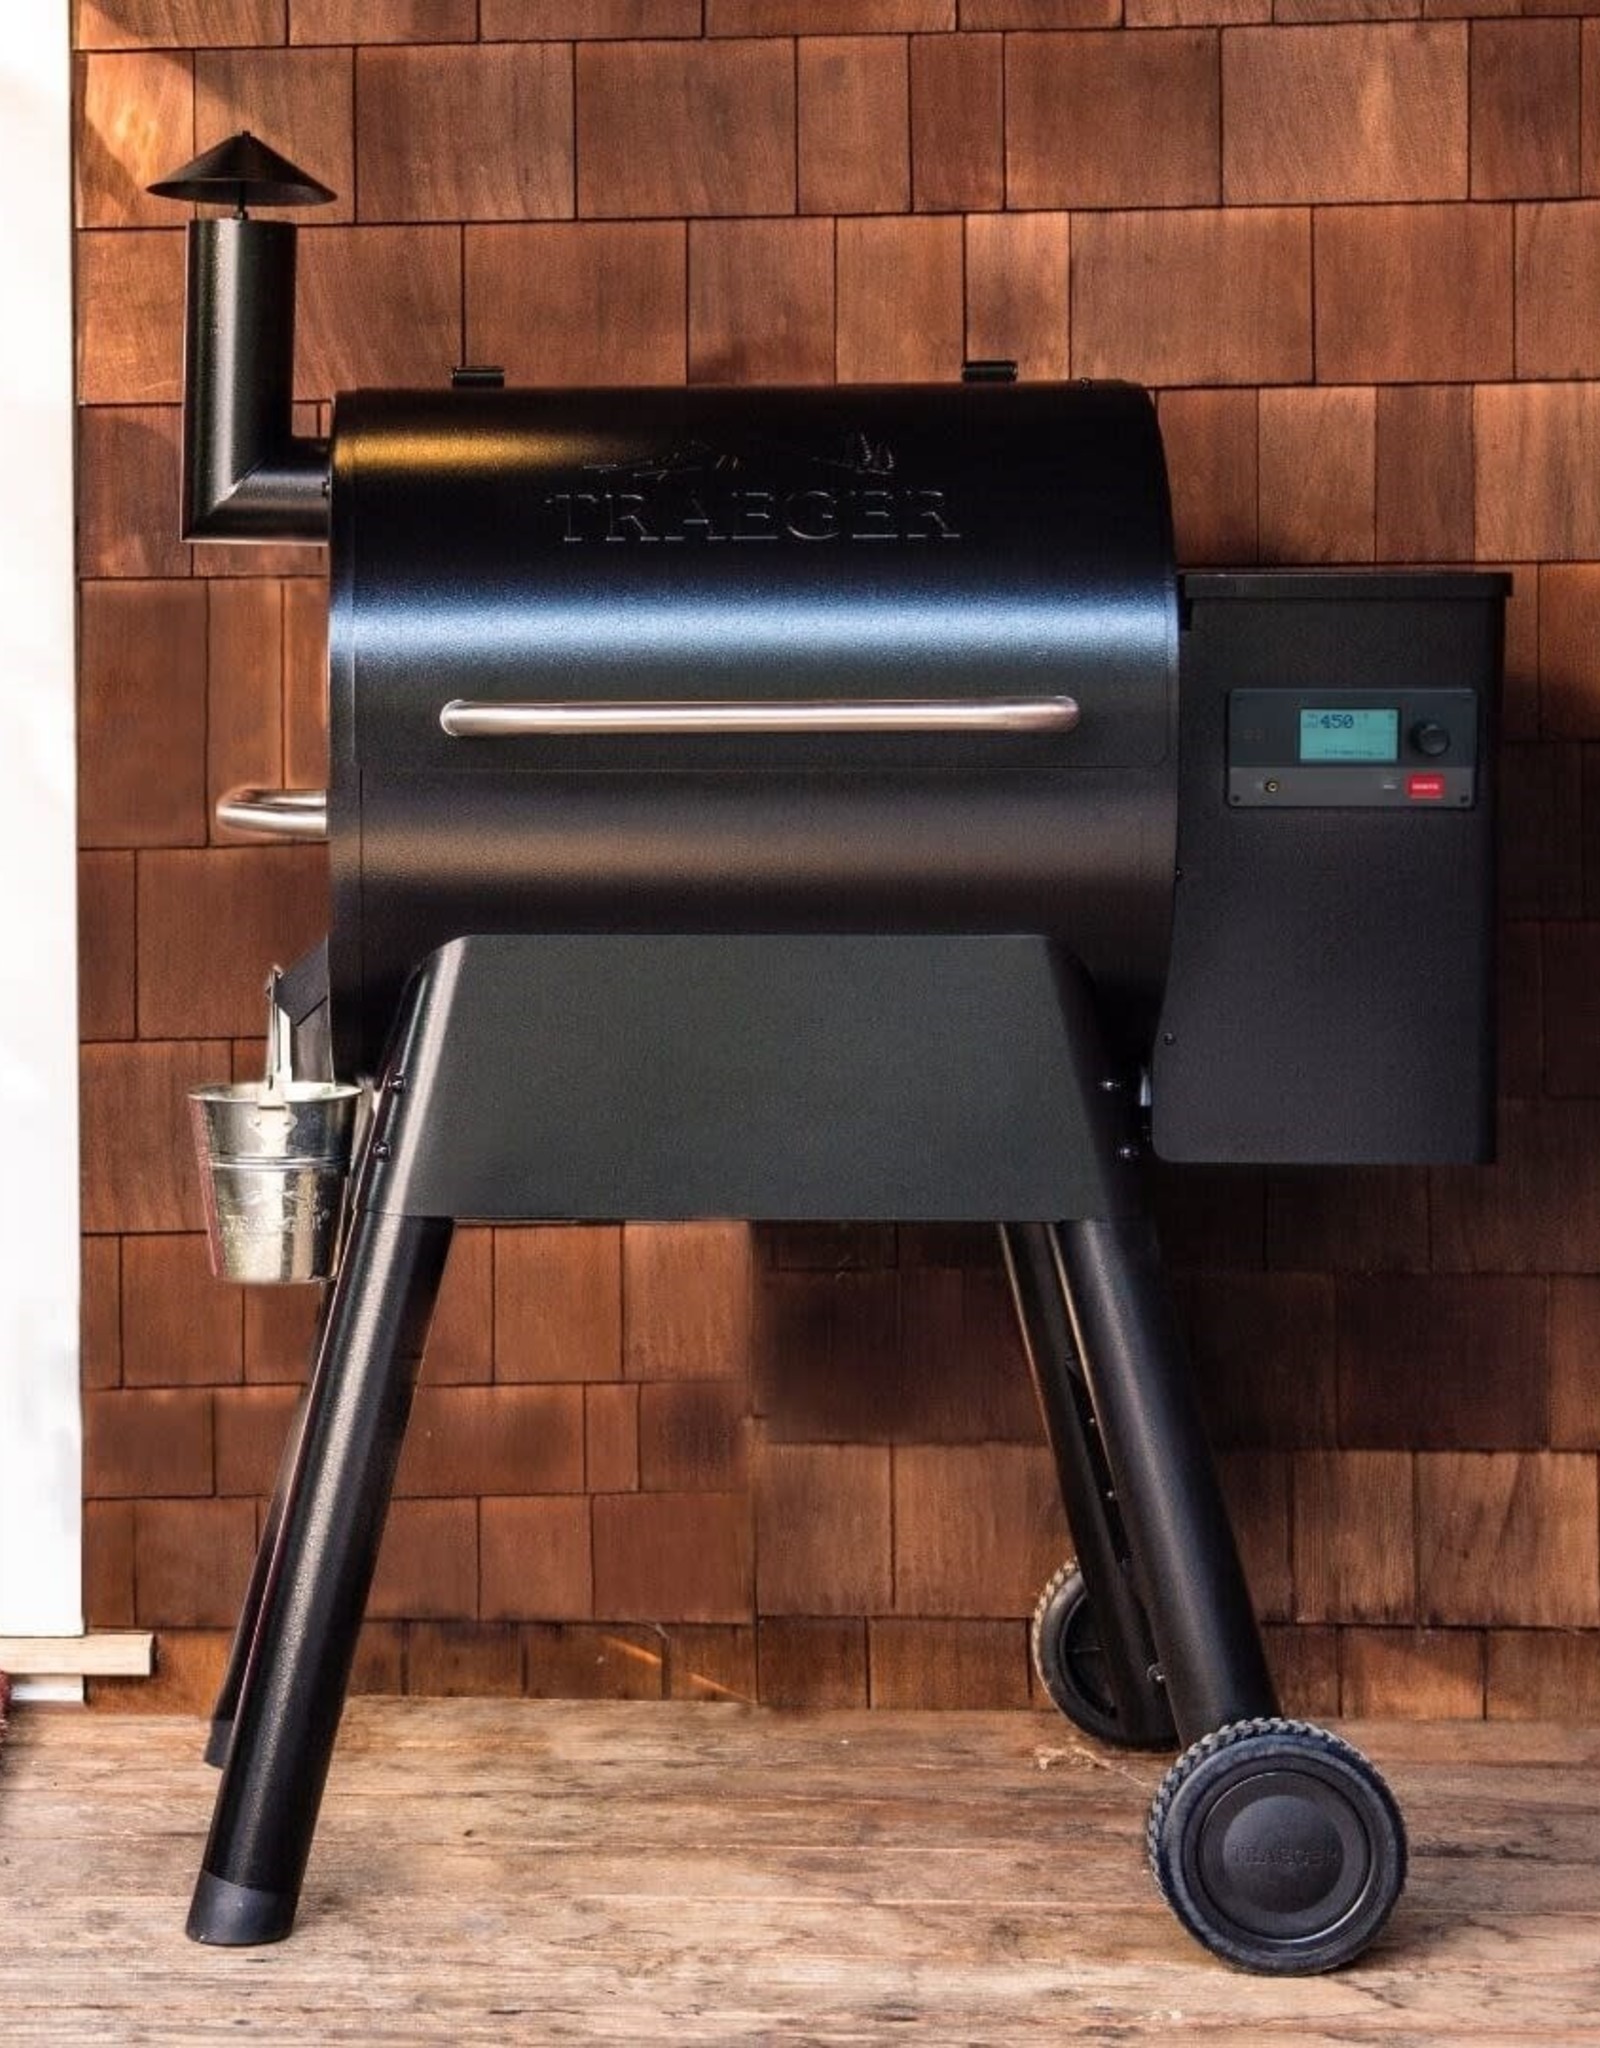 Traeger Traeger Pro 575 with WiFIRE Technology D2 Wood Pellet Freestanding Smoker Black TFB57GLE